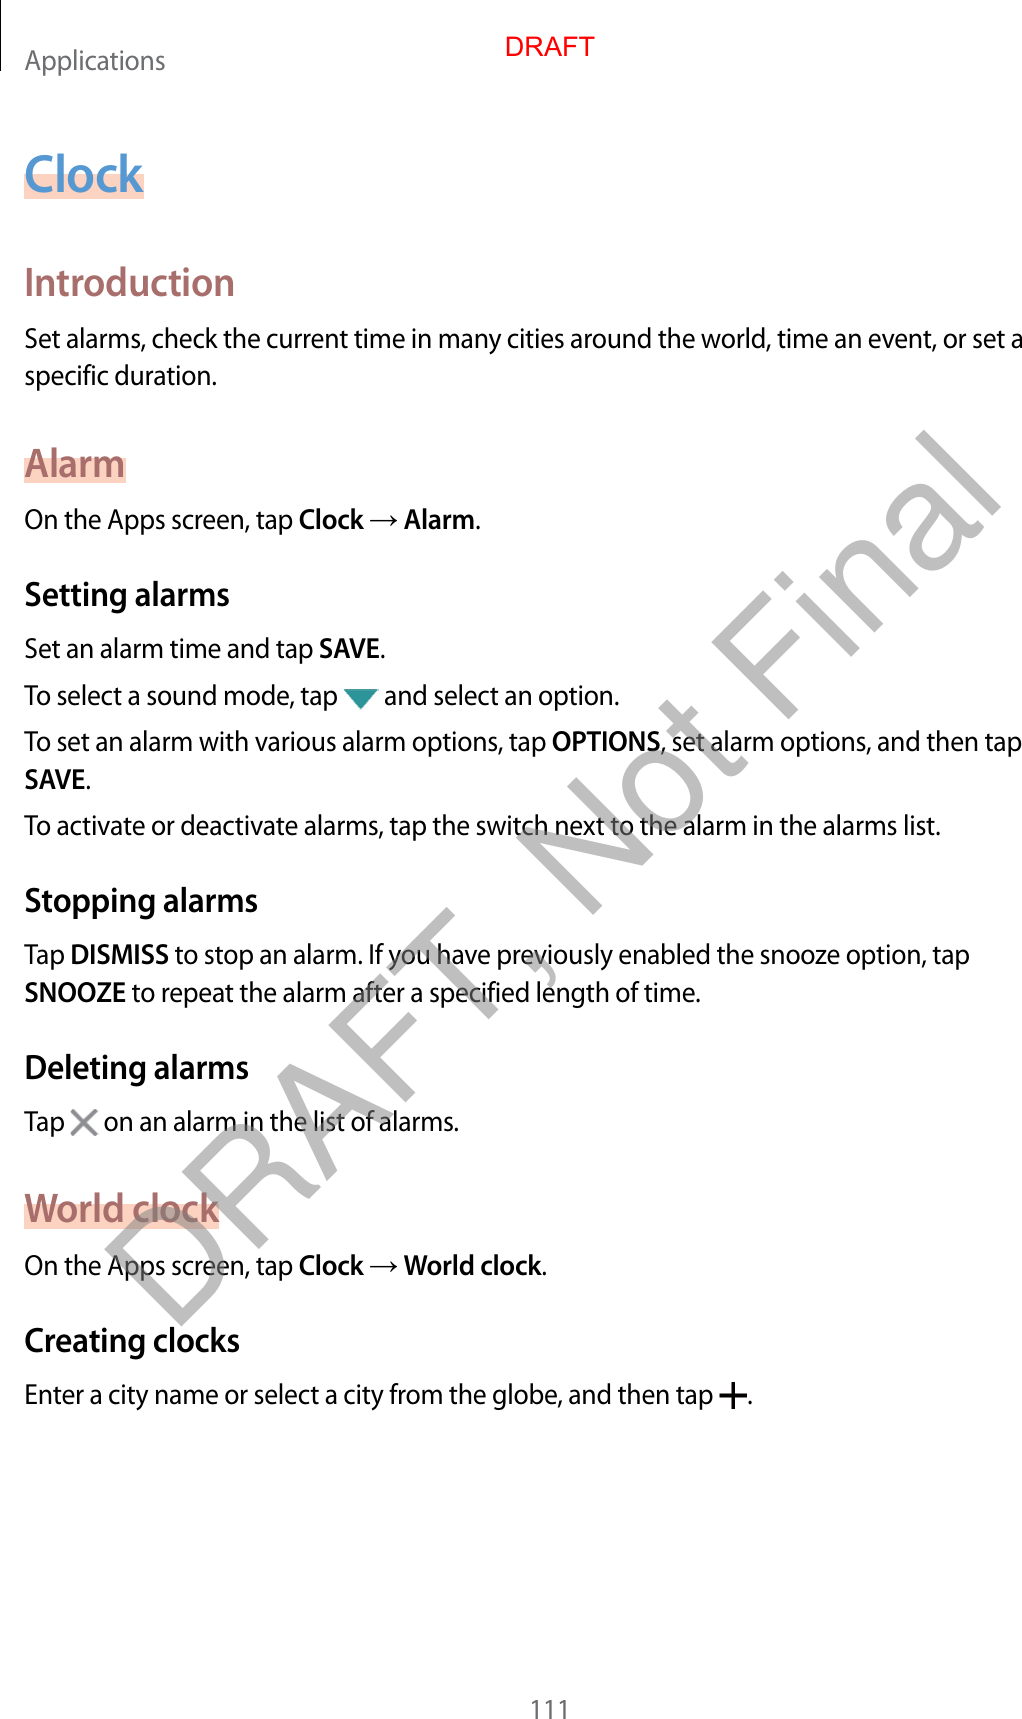 Applications111ClockIntroductionSet alarms, check the current time in many cities around the world, time an event, or set a specific duration.AlarmOn the Apps screen, tap Clock  Alarm.Setting alarmsSet an alarm time and tap SAVE.To select a sound mode, tap   and select an option.To set an alarm with various alarm options, tap OPTIONS, set alarm options, and then tap SAVE.To activate or deactivate alarms, tap the switch next to the alarm in the alarms list.Stopping alarmsTap DISMISS to stop an alarm. If you have previously enabled the snooze option, tap SNOOZE to repeat the alarm after a specified length of time.Deleting alarmsTap   on an alarm in the list of alarms.World clockOn the Apps screen, tap Clock  World clock.Creating clocksEnter a city name or select a city from the globe, and then tap  .DRAFTDRAFT, Not Final